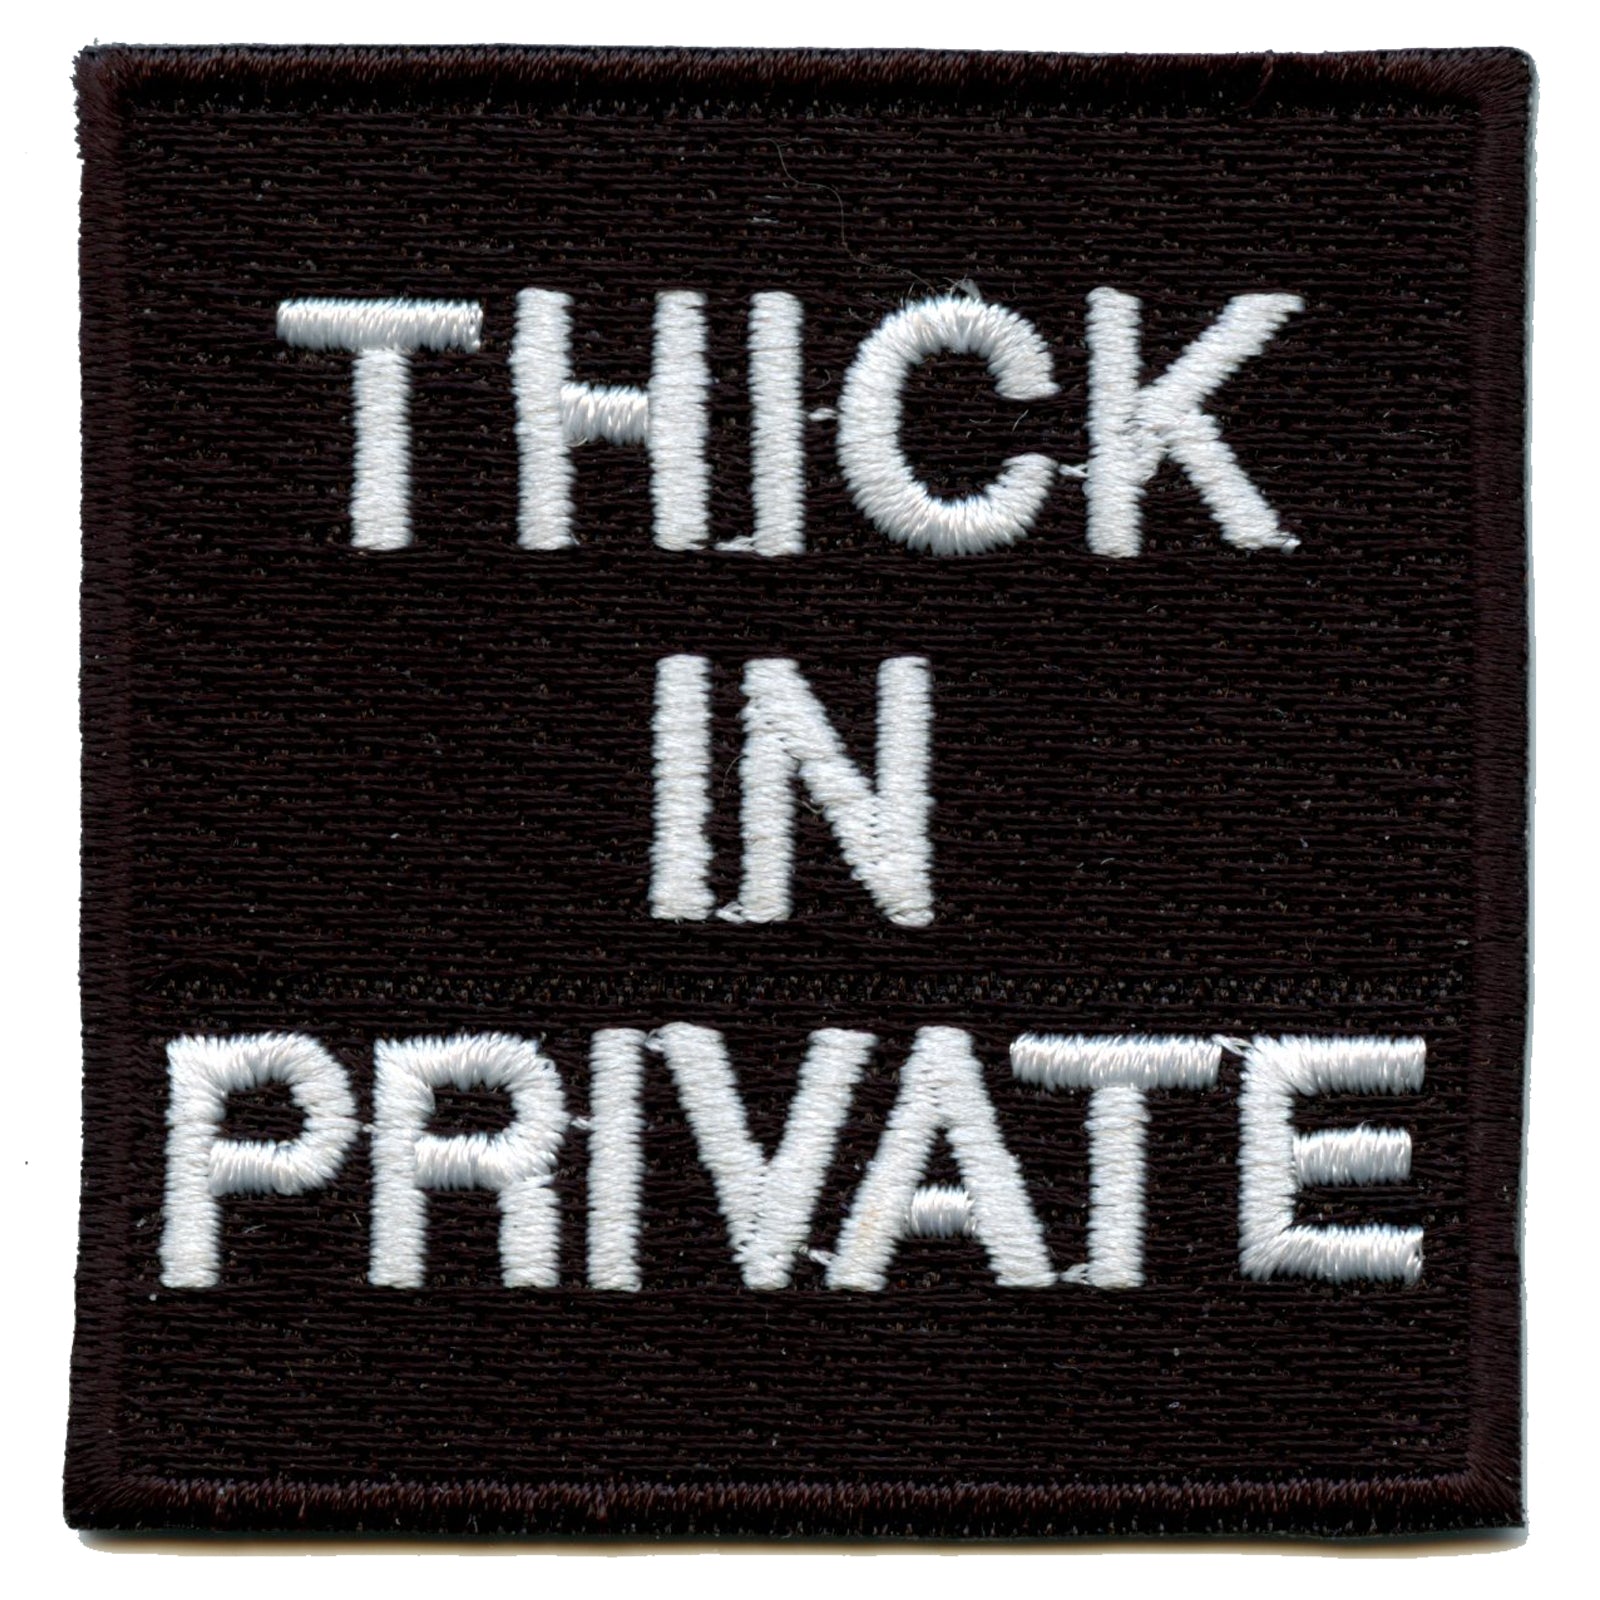 Thick In Private Box Embroidered Iron On Patch 